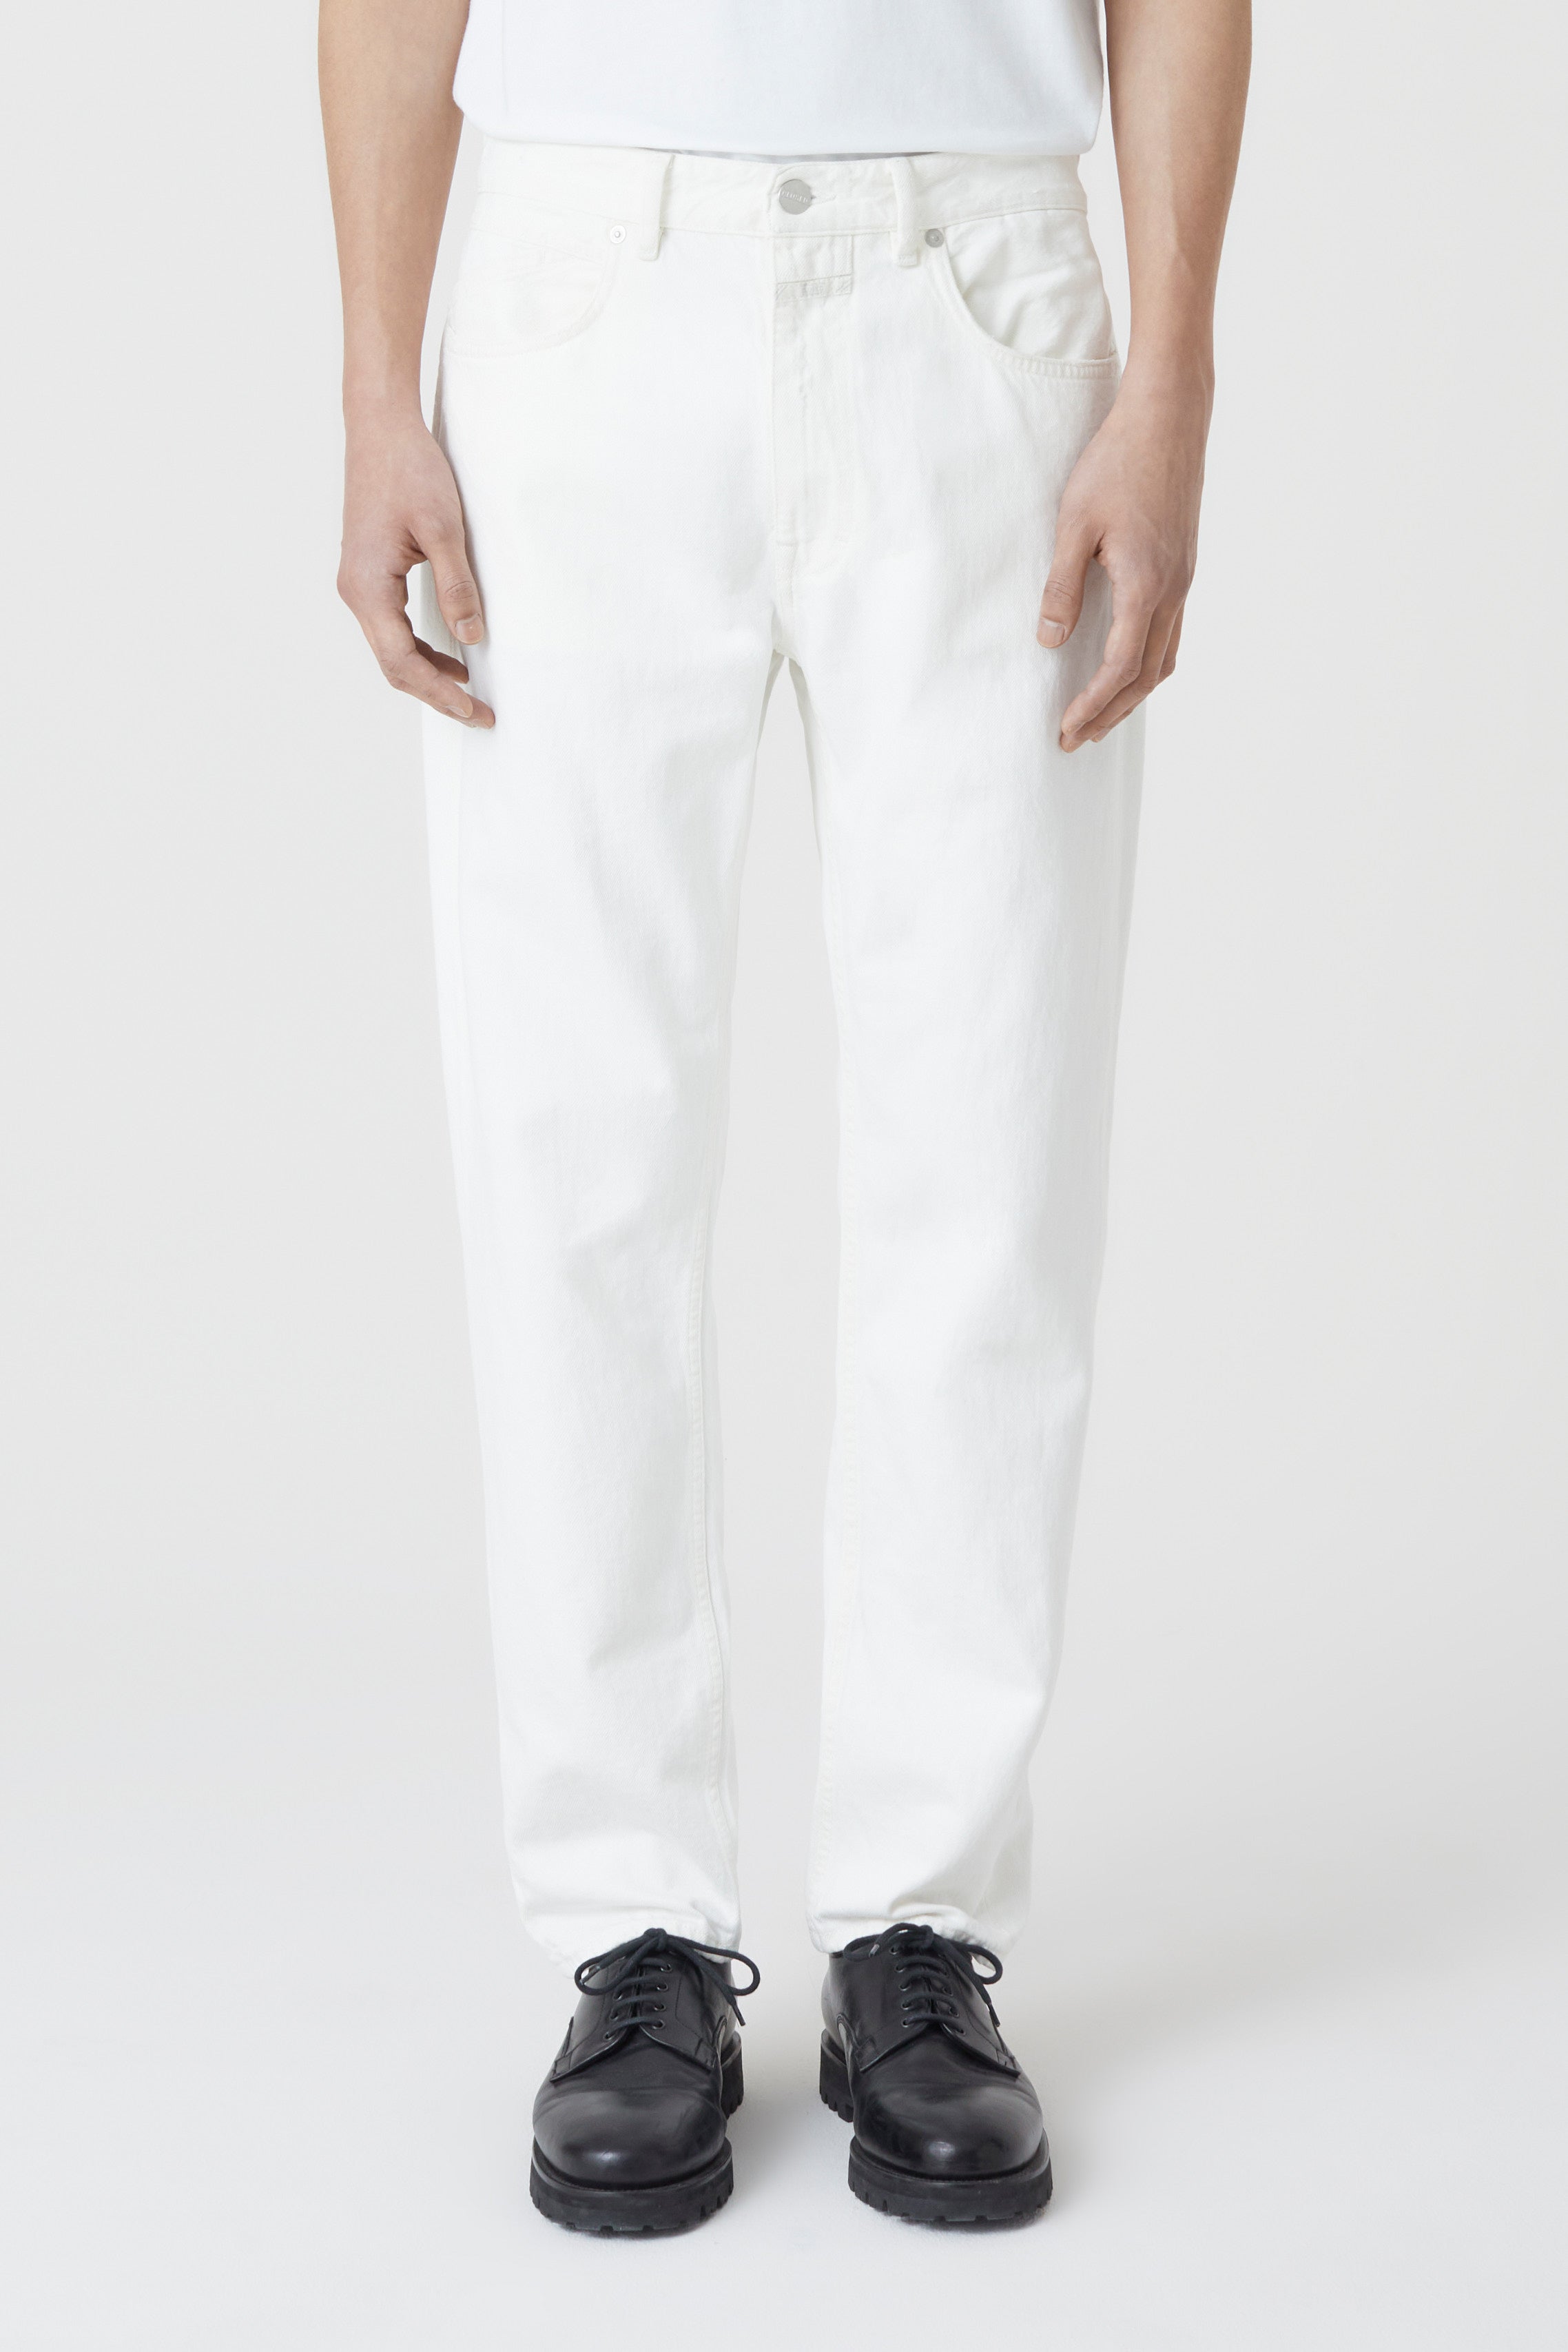 CLOSED-OUTLET-SALE-STYLE-NAME-COOPER-TAPERED-JEANS-Hosen-ARCHIVE-COLLECTION.jpg